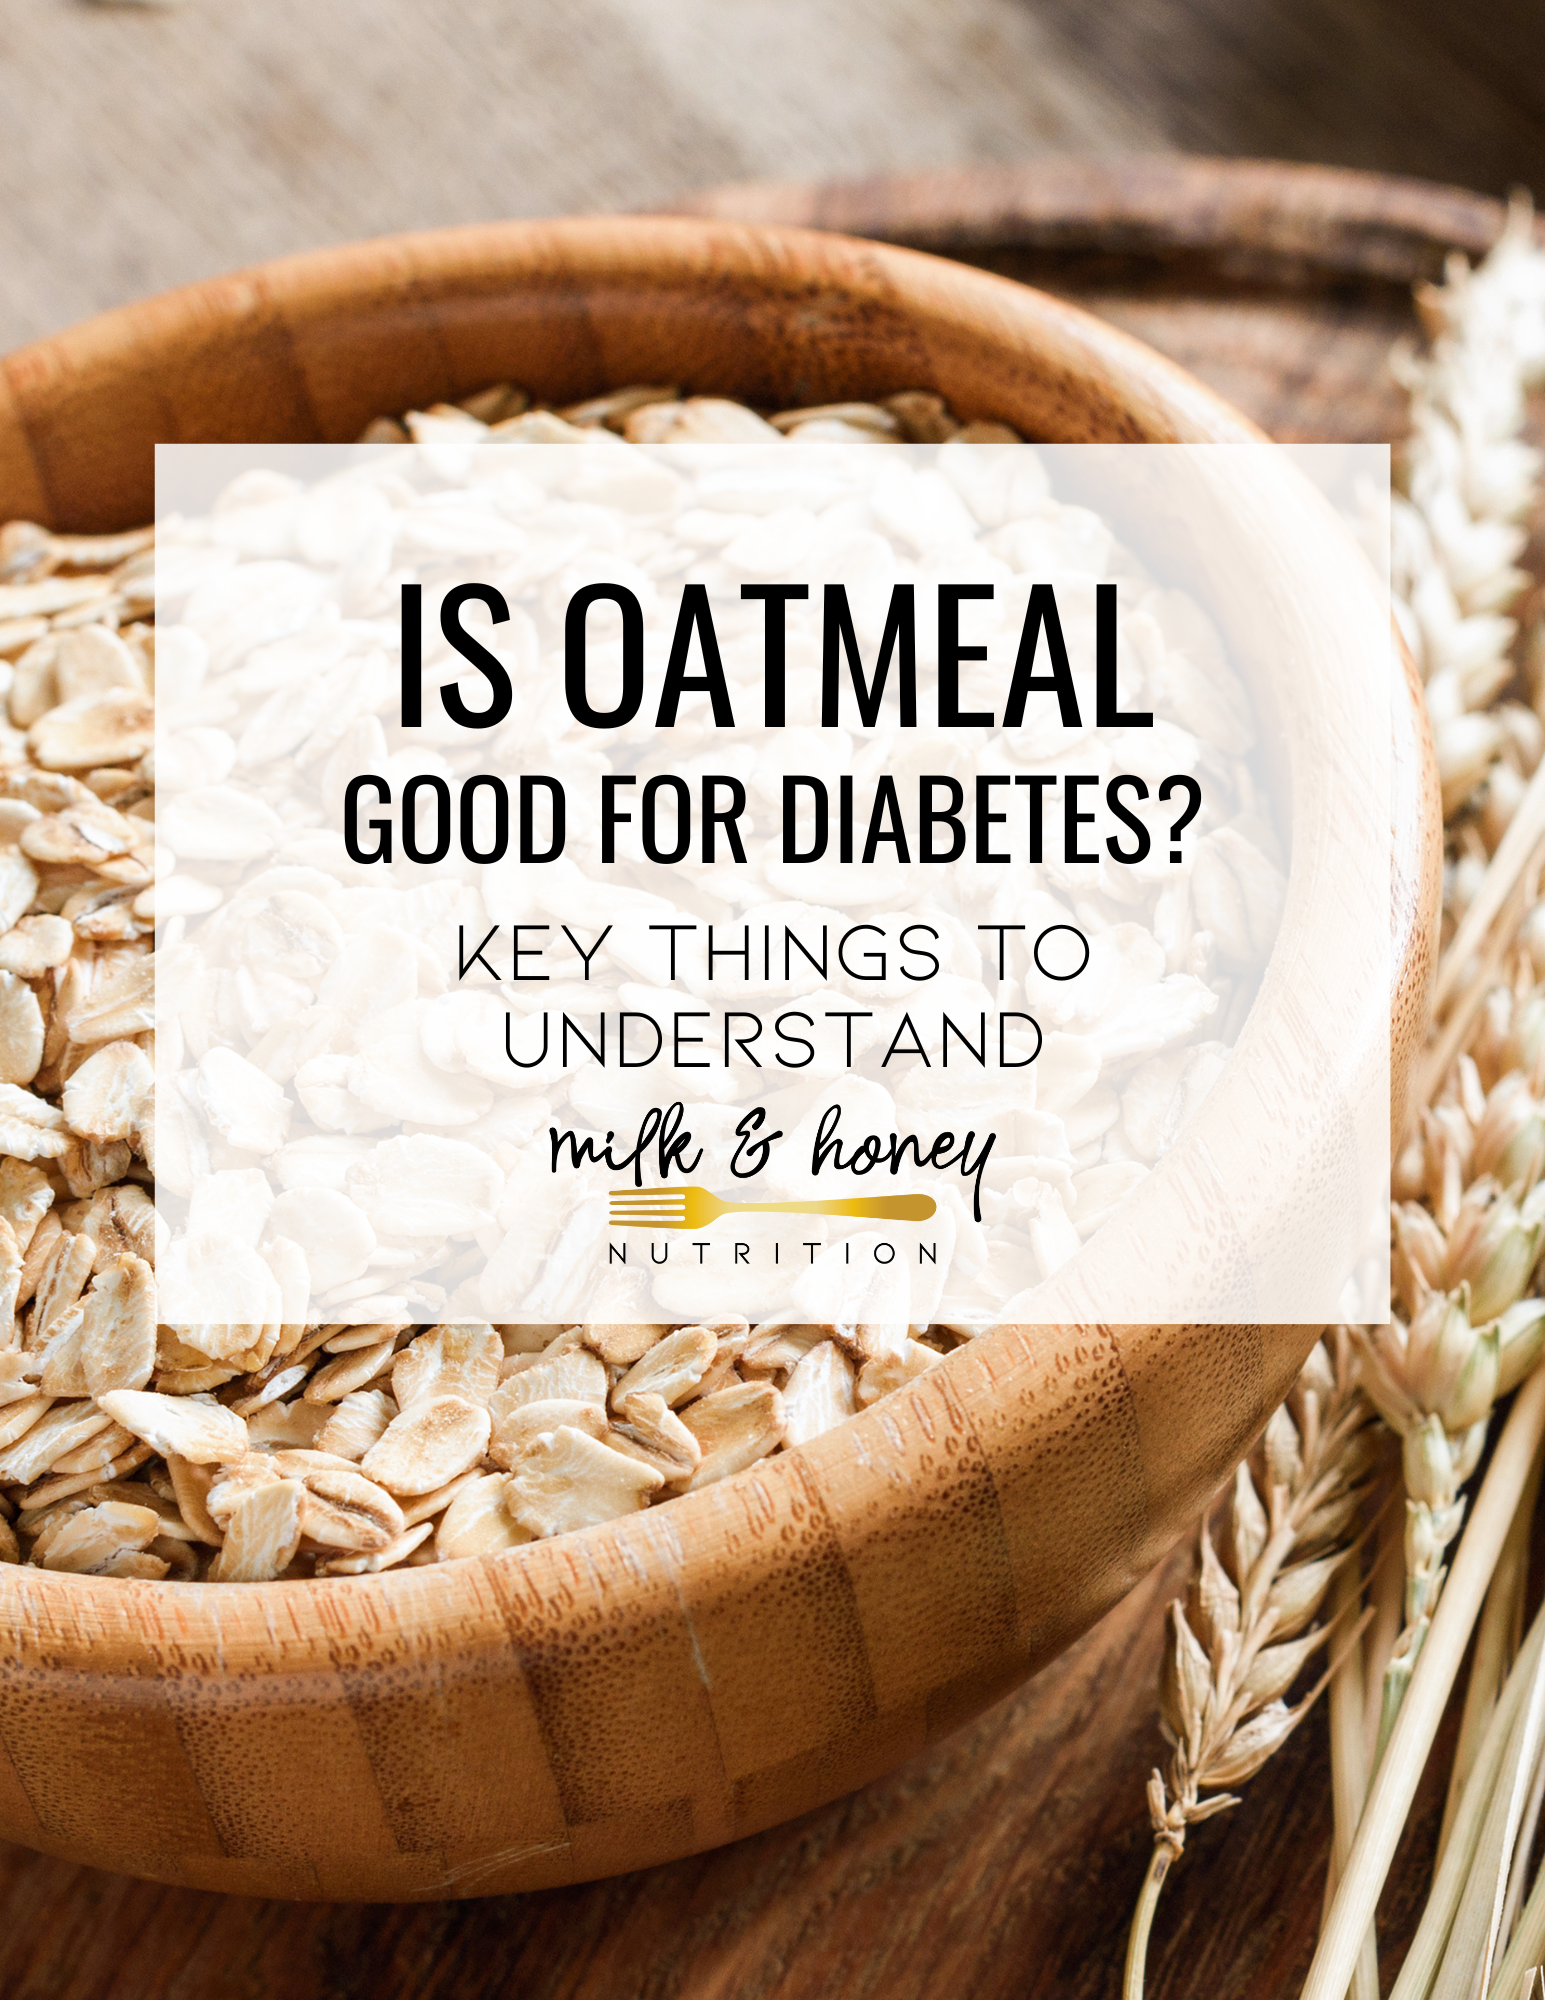 is oatmeal good for diabetes?